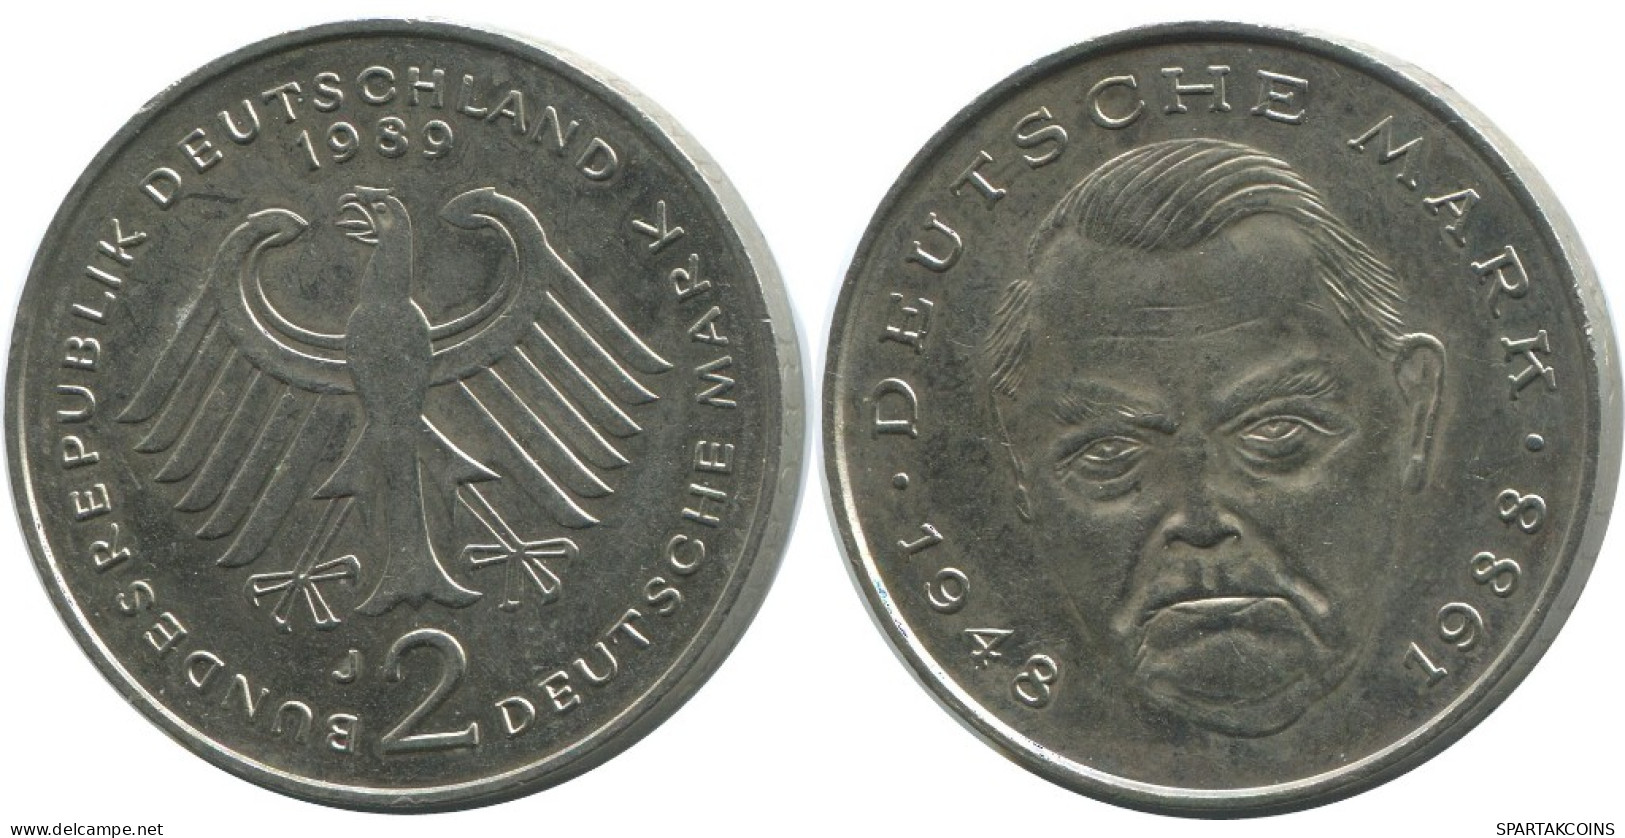 2 DM 1989 J L.ERHARD WEST & UNIFIED GERMANY Coin #AG265.3.U.A - 2 Marcos